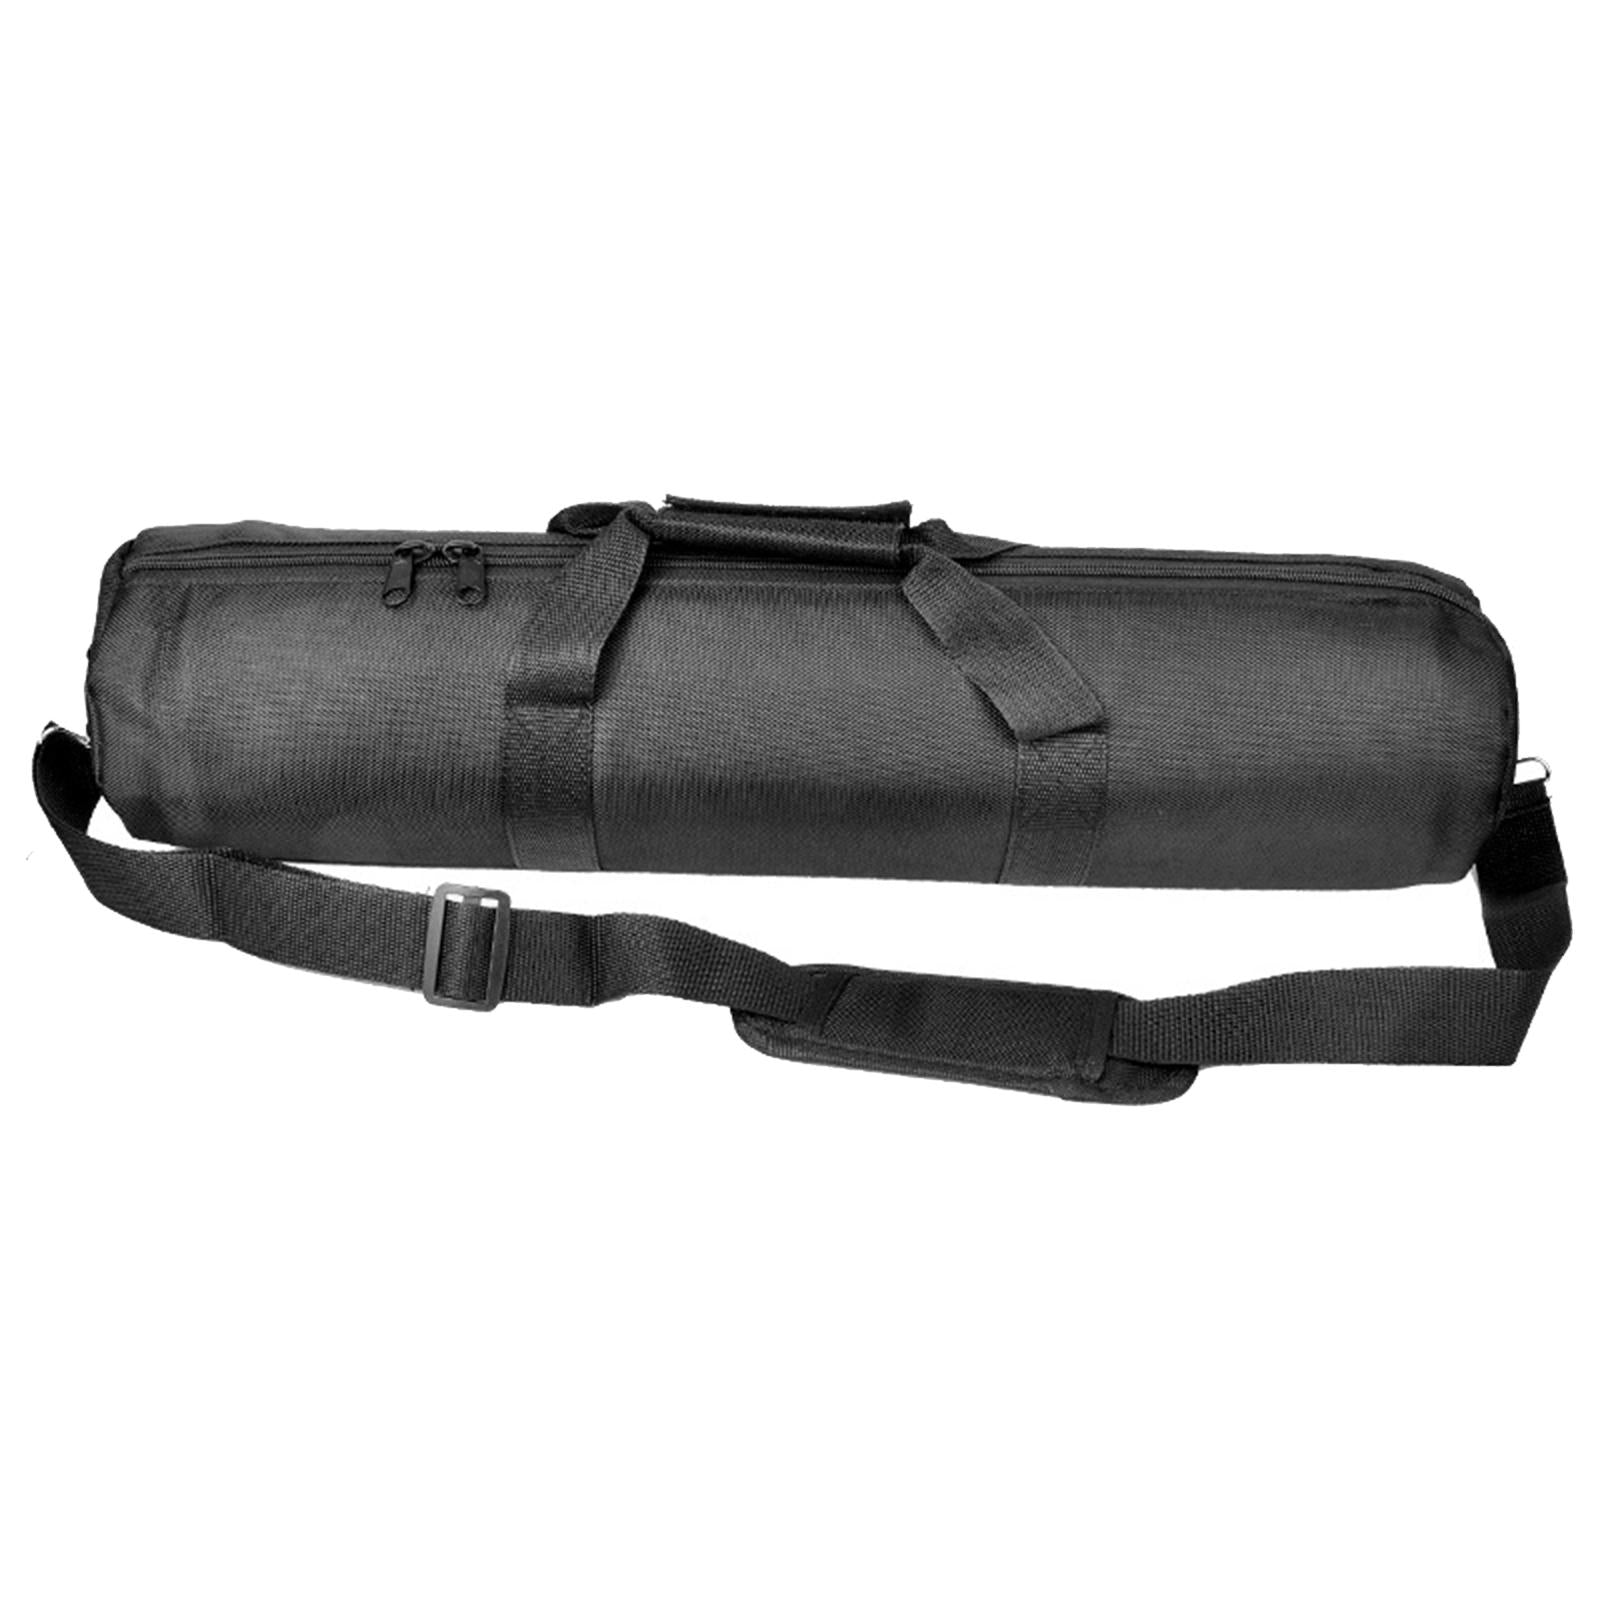 Tripod Carrying Bag Heavy Duty Multi Function Dual Use Outdoor for Umbrella 80cm